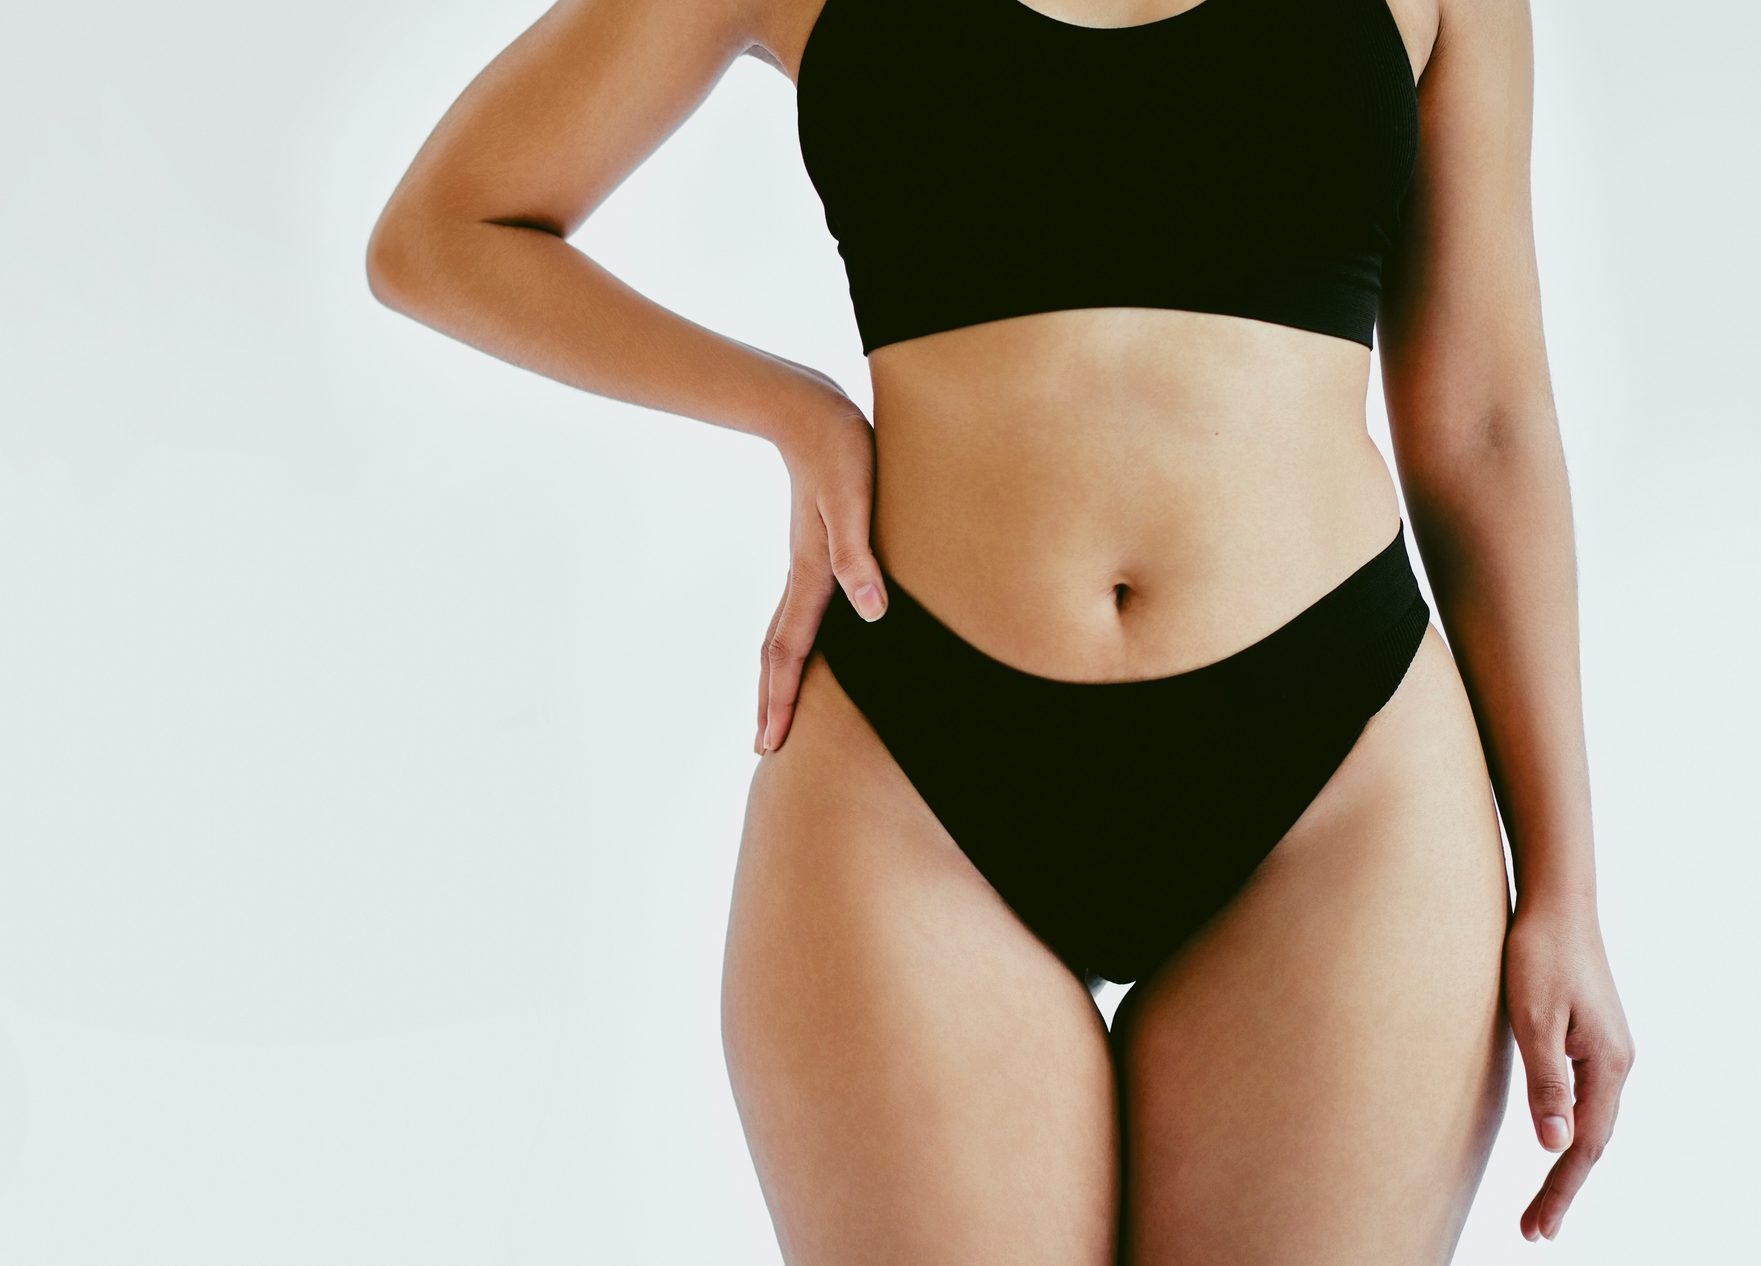 FUNIBER-healthy-curvy-woman-in-bikini-with-normal-body-and-for-summer-swimsuit-season-fit-black-girl-in-simple-swimwear-slim-stomach-and-hips-female-model-poses-for-body-positivity-fashion-and-wellness